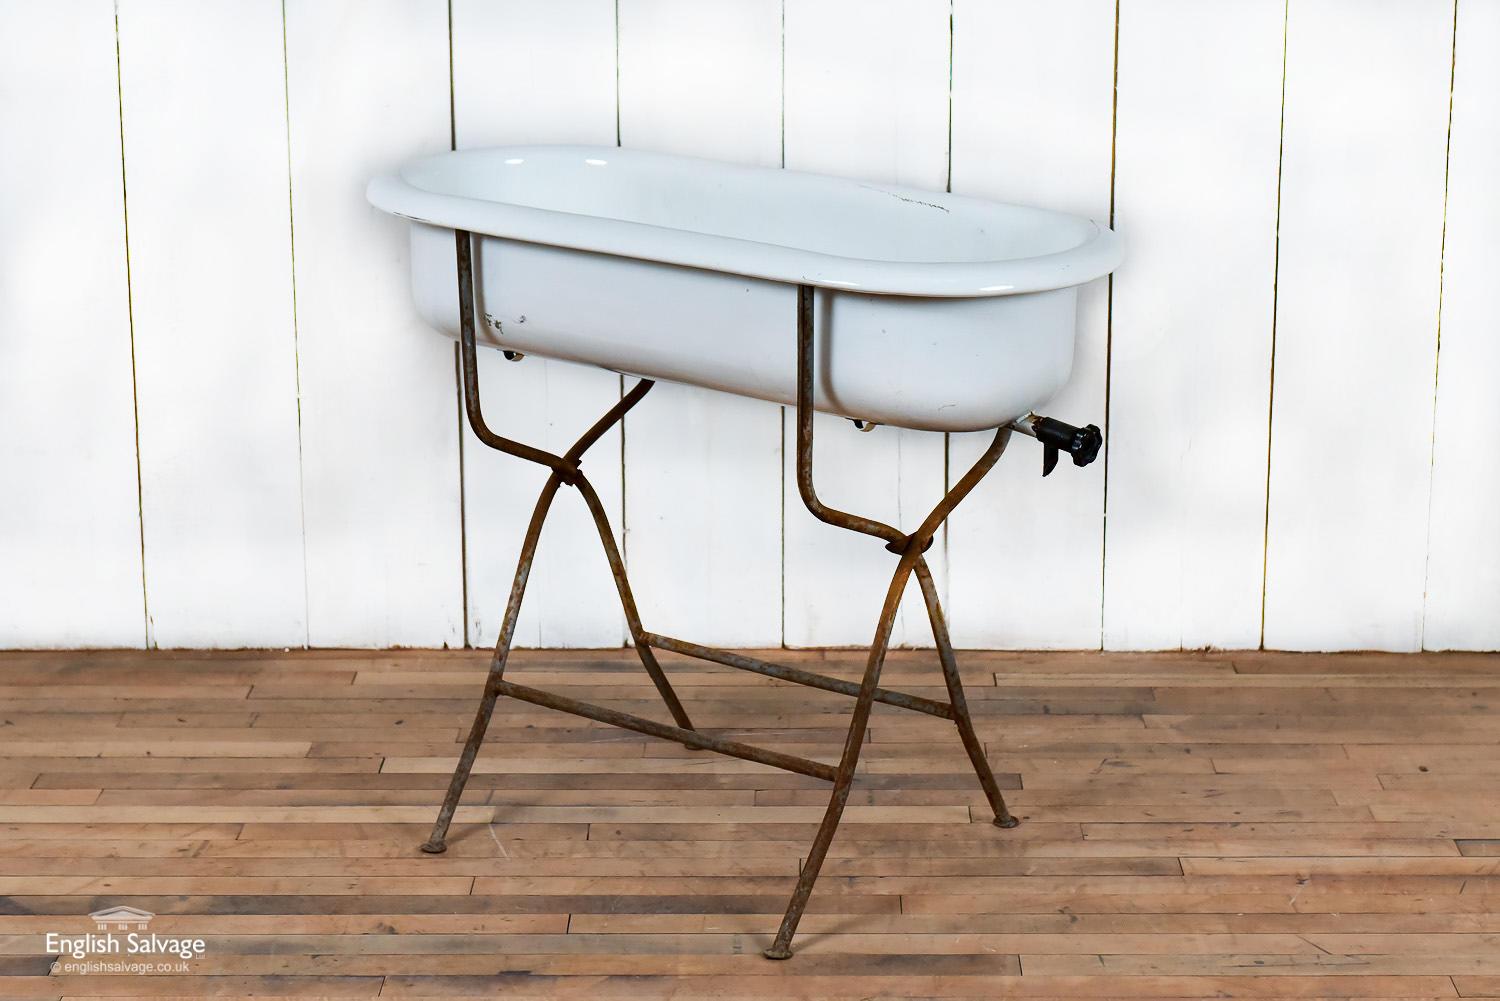 Vintage child's bath on a metal stand. The stand has an appealing patina with surface rust and grey paint. The bath itself has a few minor scratches but appears to be in sound condition. Overall dimensions are given below and the bath tub without